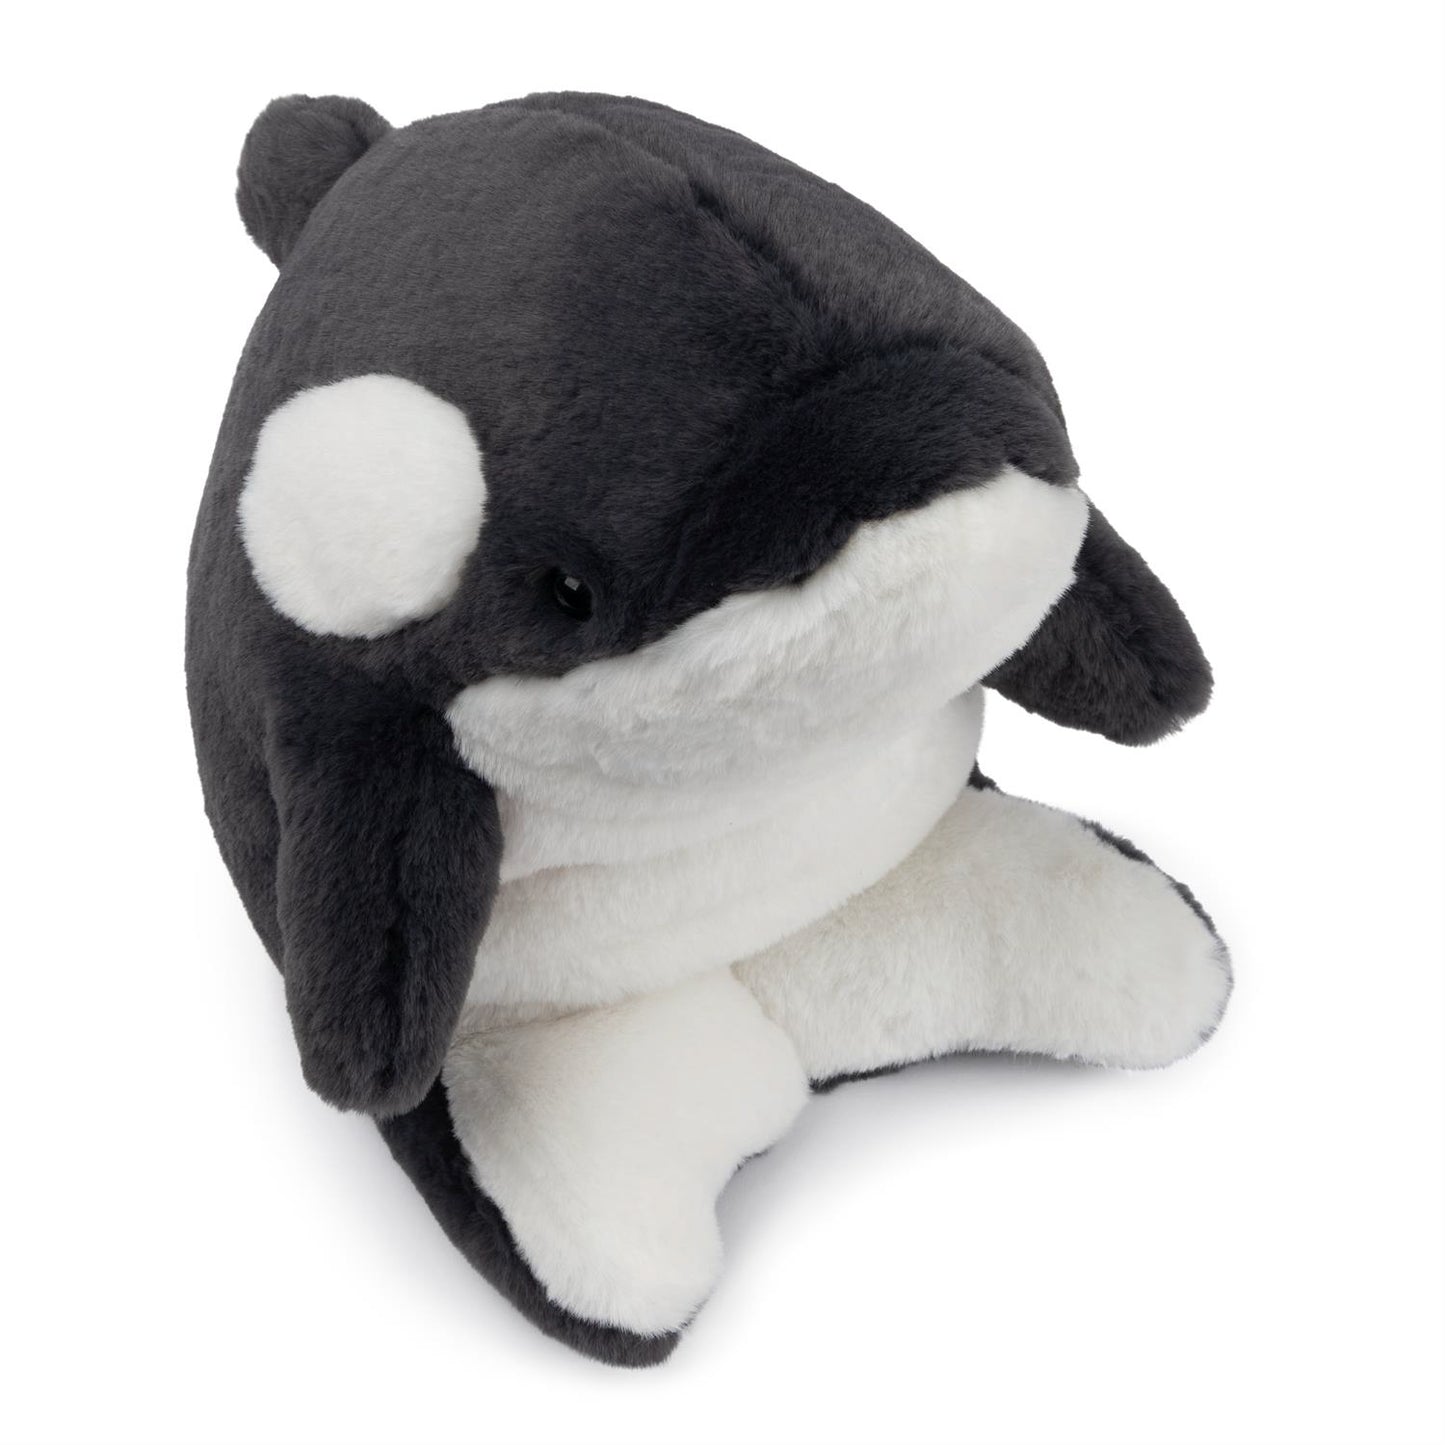 A super soft and cozy Orca Whale. Ready to be squeezed and cuddled